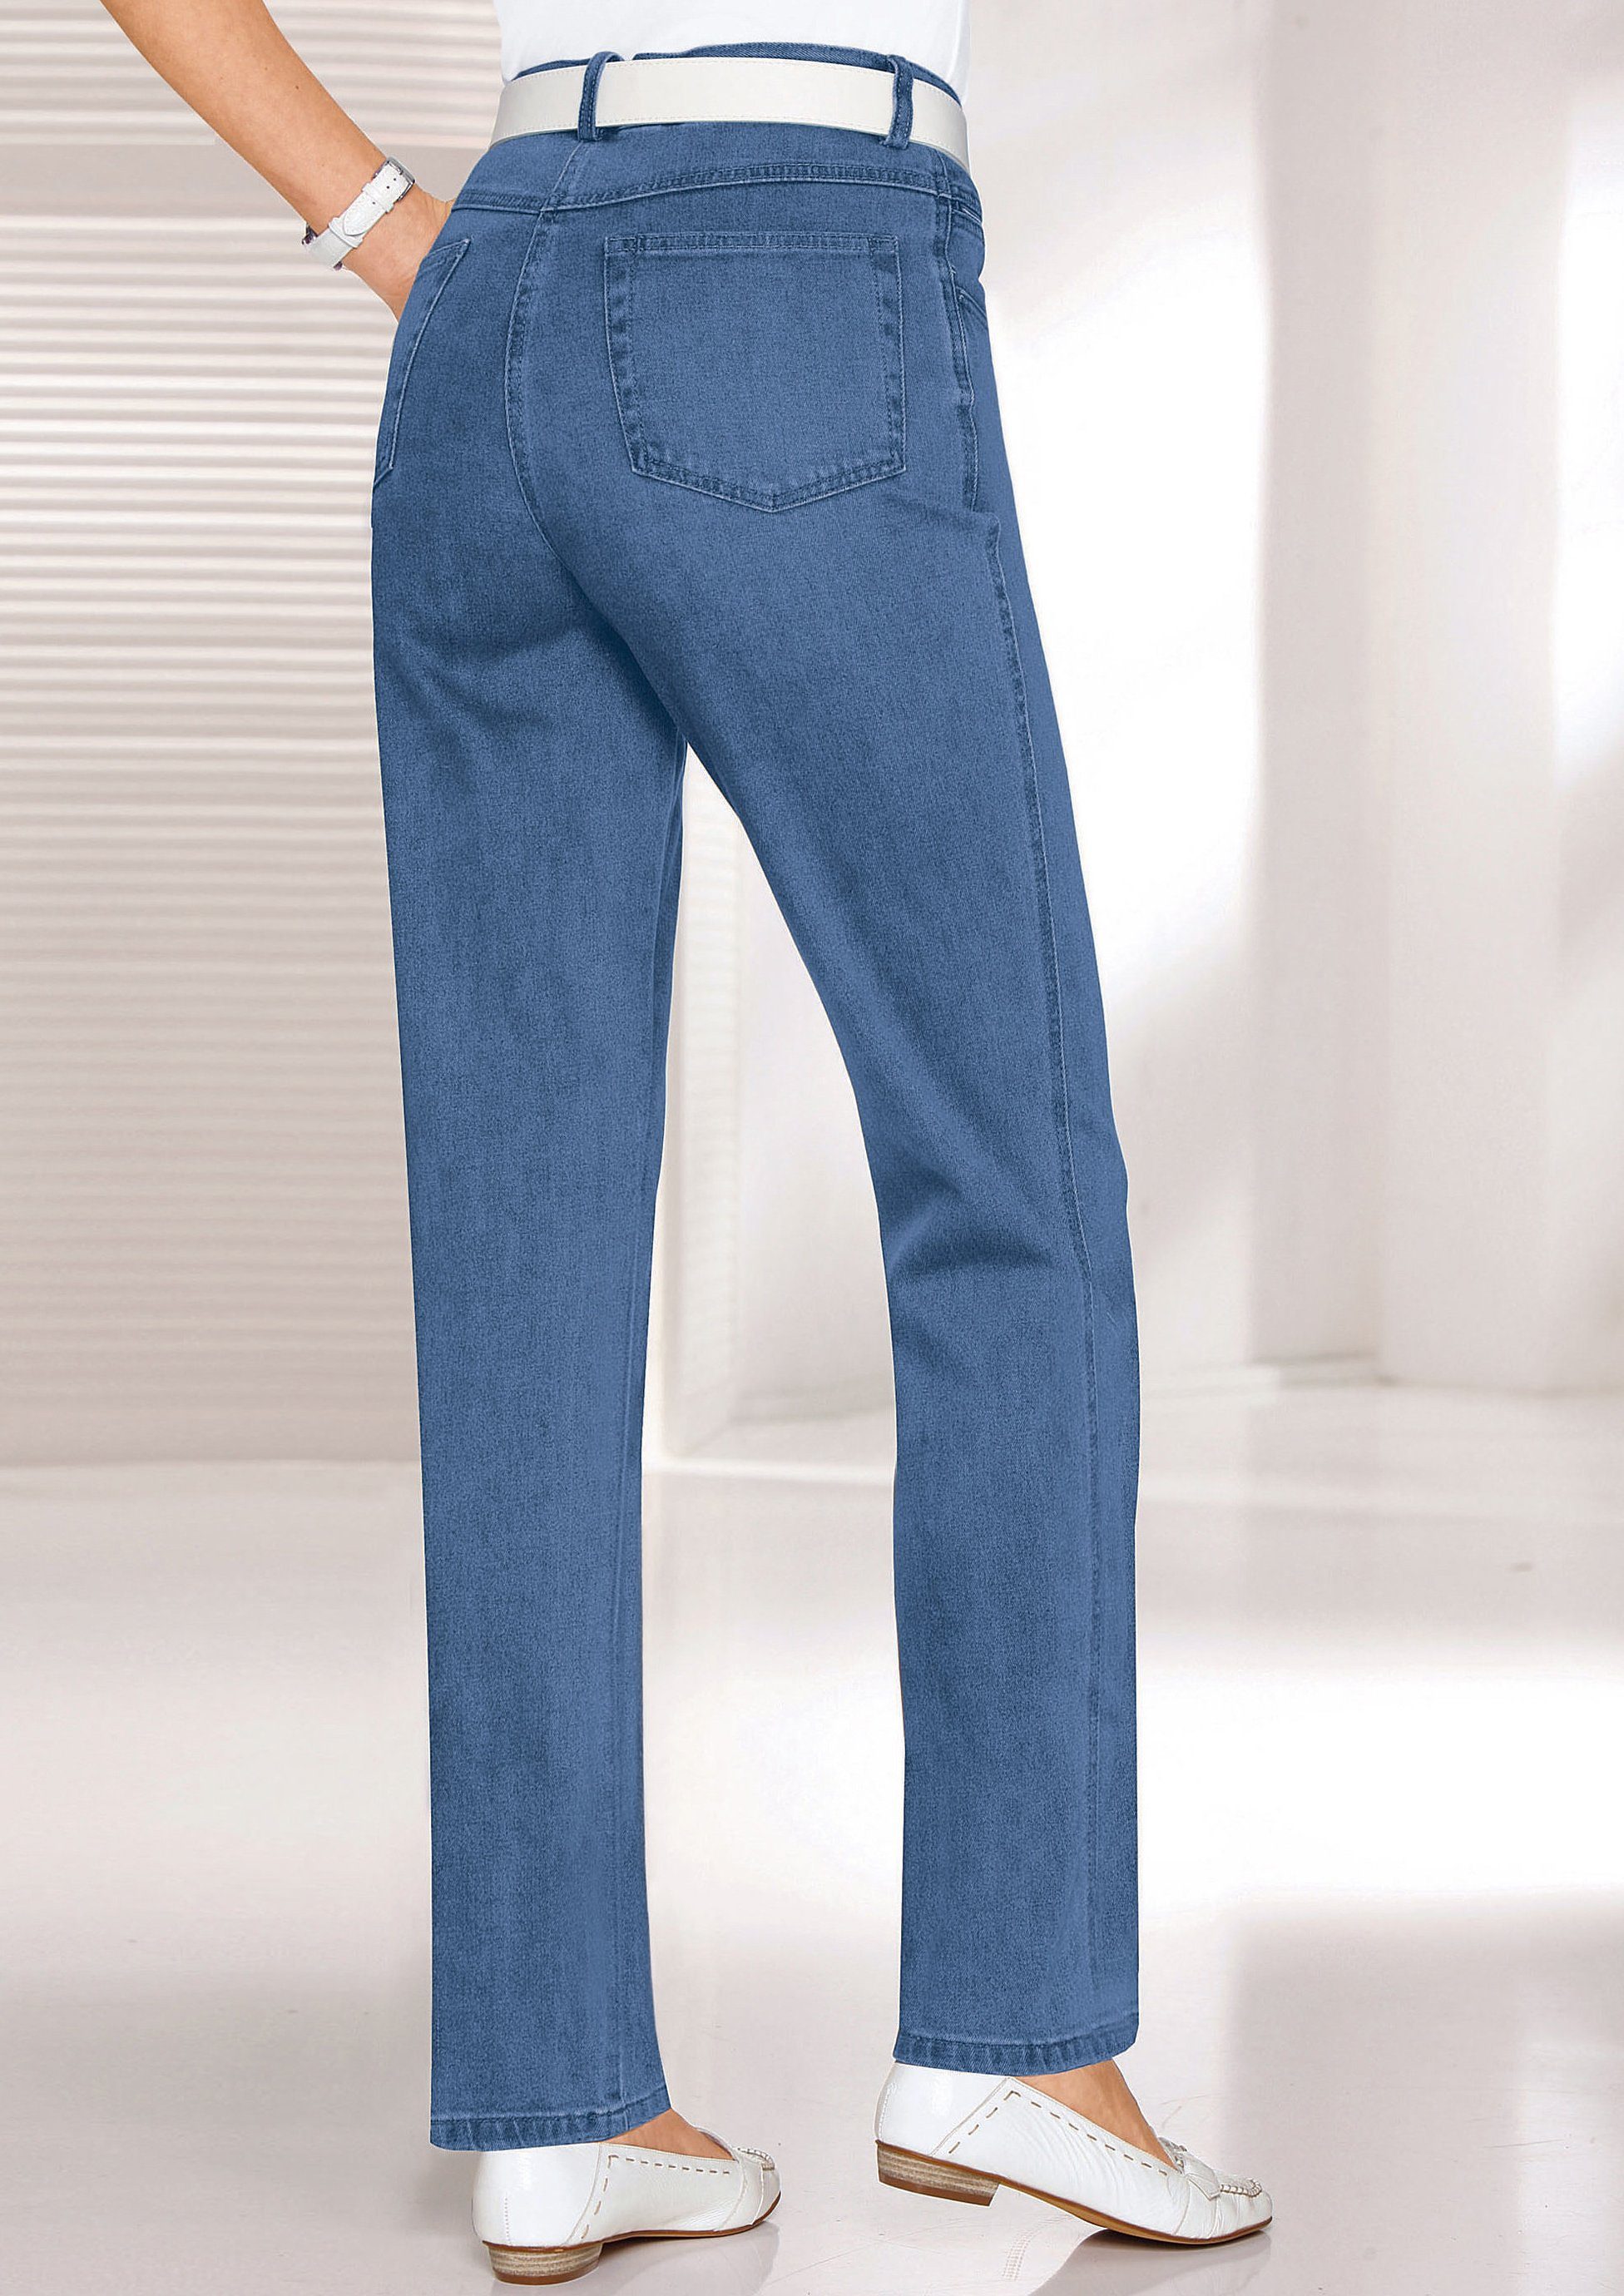 Otto - Collection L. NU 15% KORTING: Jeans